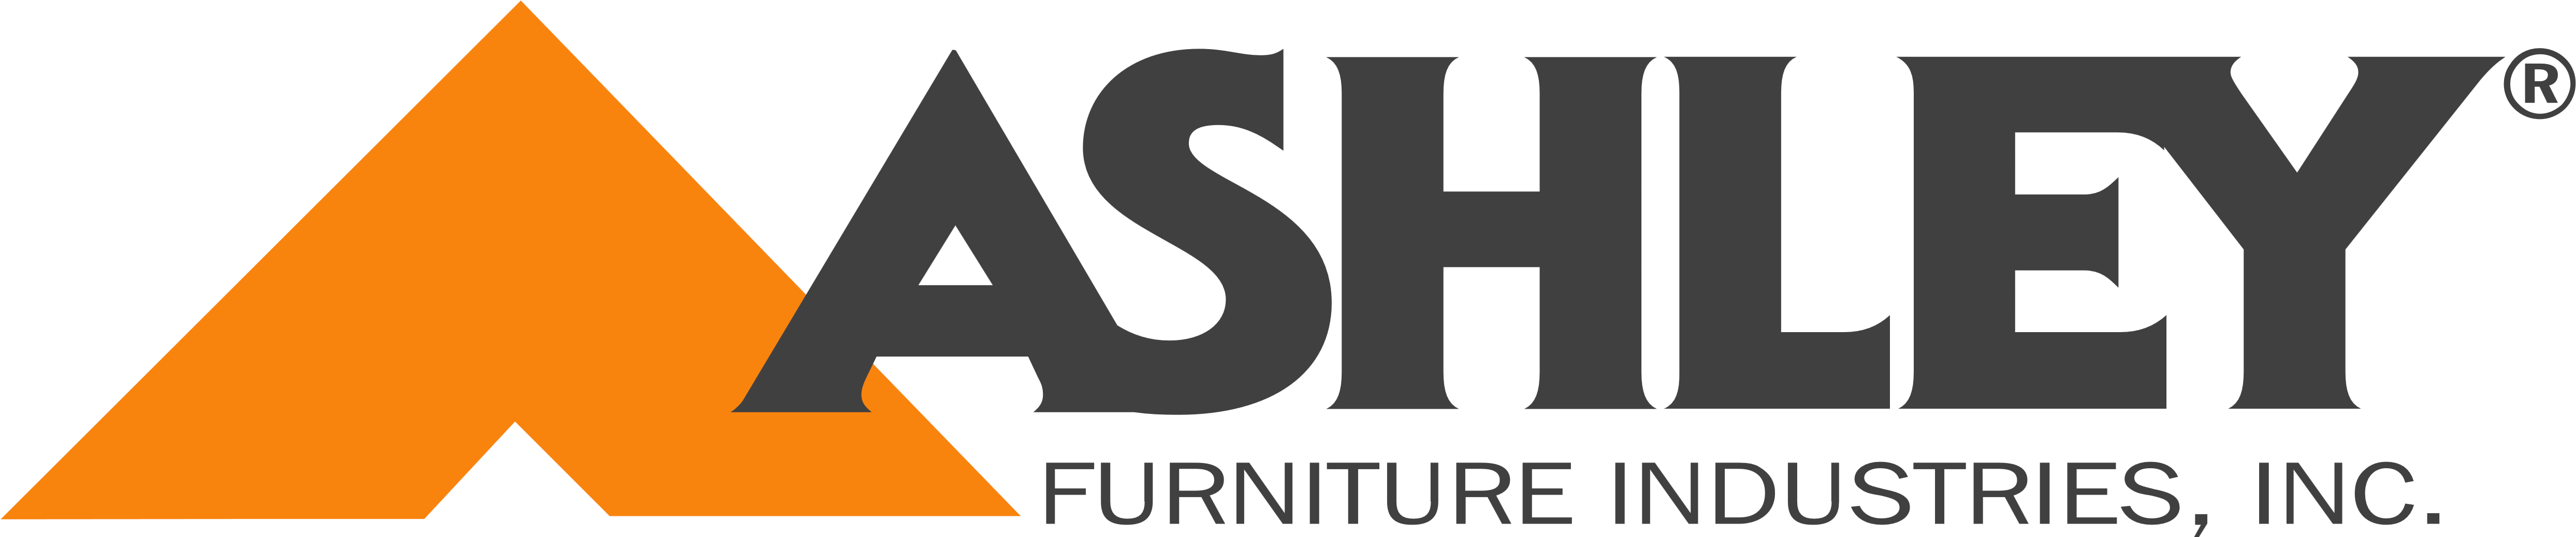 ashley furniture logo clipart 10 free Cliparts | Download images on ...